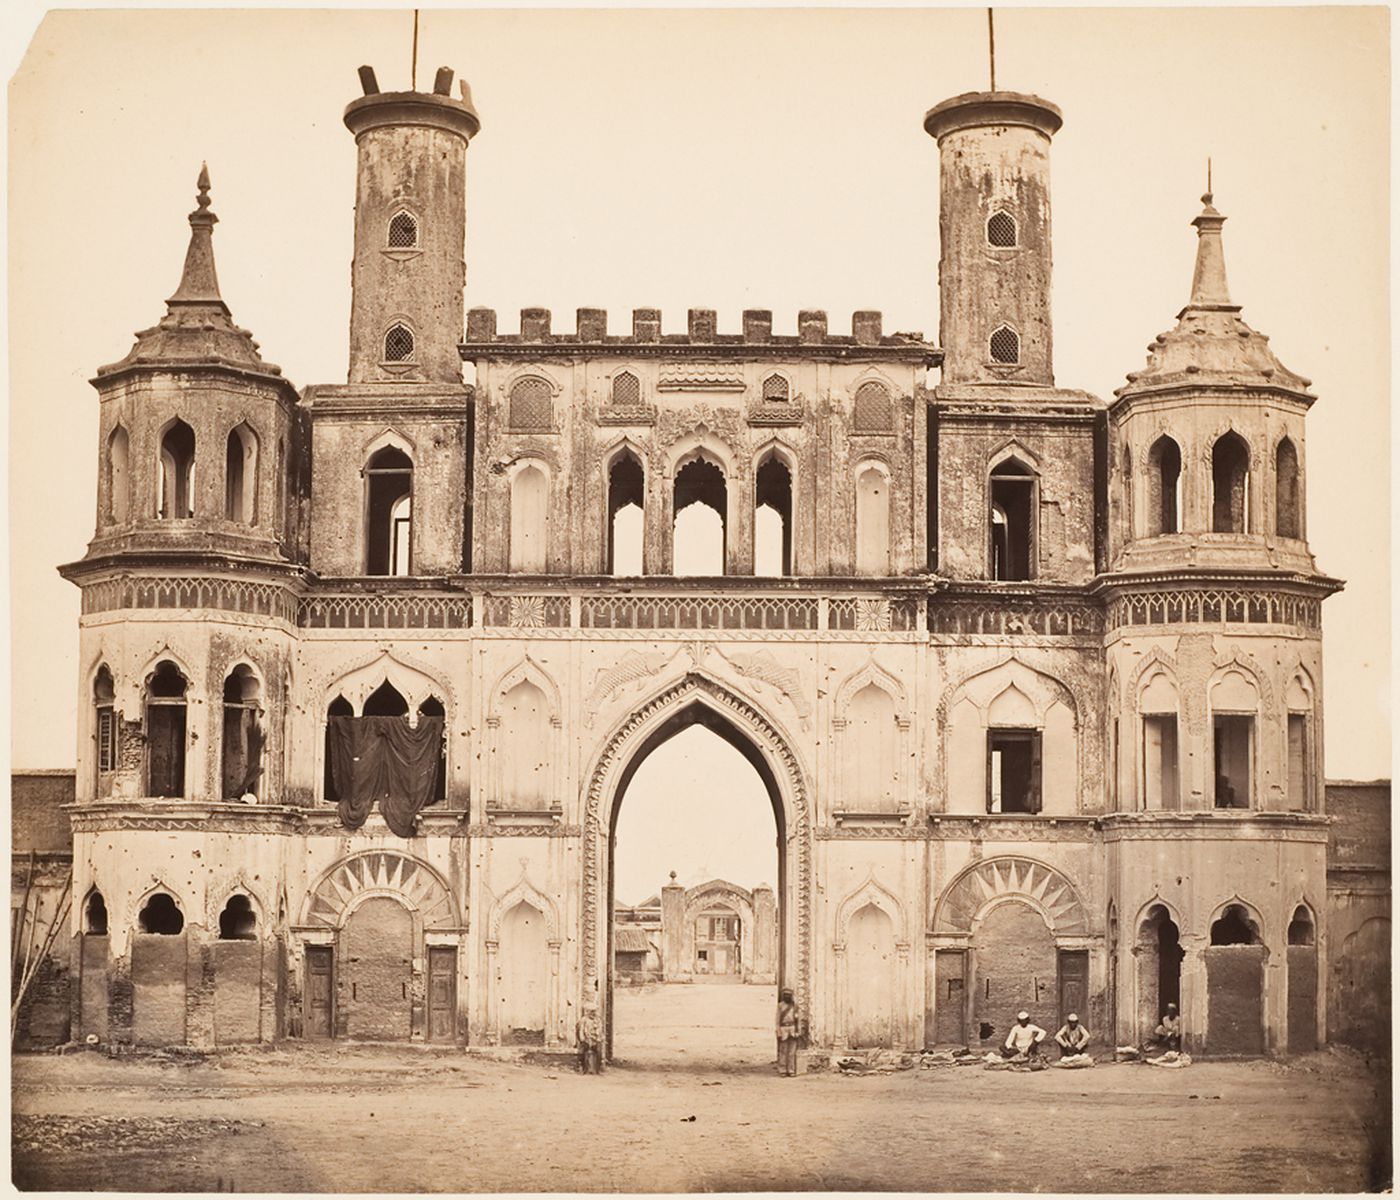 The Motee Mahal, Lucknow, India